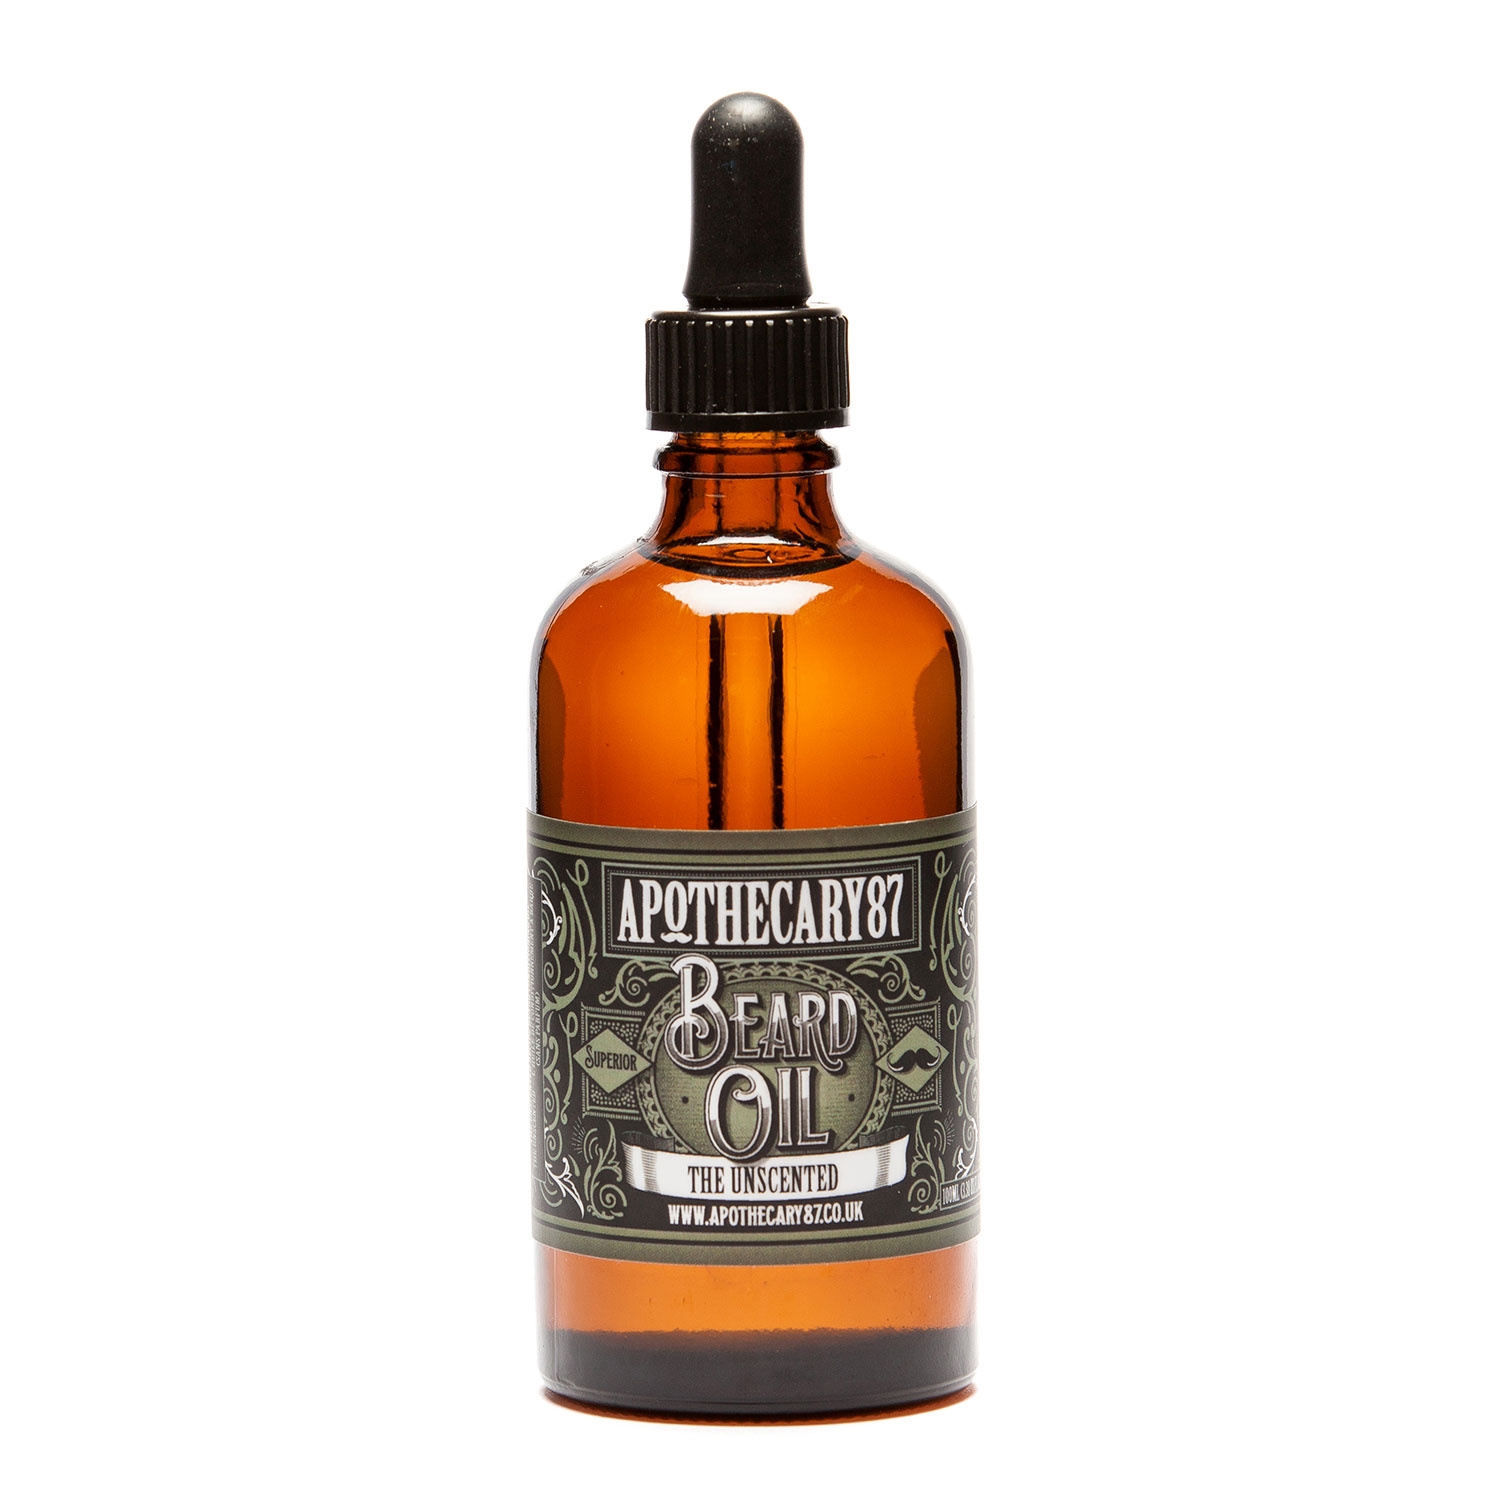 Product image from Apothecary87 Grooming - The Unscented Beard Oil